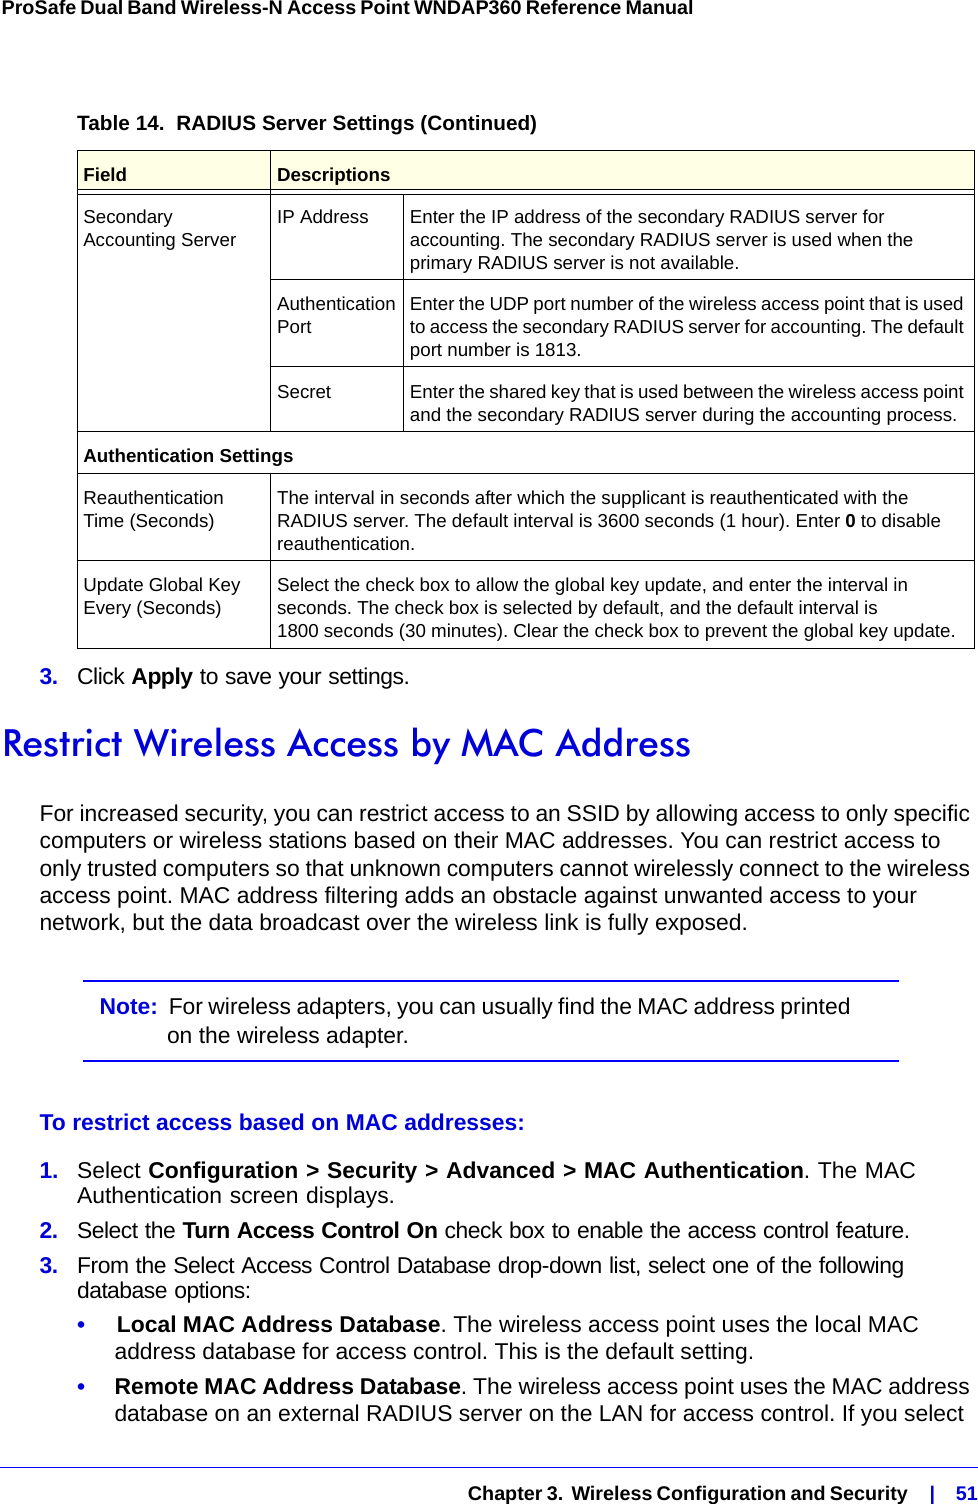   Chapter 3.  Wireless Configuration and Security    |    51ProSafe Dual Band Wireless-N Access Point WNDAP360 Reference Manual 3.  Click Apply to save your settings.Restrict Wireless Access by MAC AddressFor increased security, you can restrict access to an SSID by allowing access to only specific computers or wireless stations based on their MAC addresses. You can restrict access to only trusted computers so that unknown computers cannot wirelessly connect to the wireless access point. MAC address filtering adds an obstacle against unwanted access to your network, but the data broadcast over the wireless link is fully exposed.Note:  For wireless adapters, you can usually find the MAC address printed on the wireless adapter.To restrict access based on MAC addresses:1.  Select Configuration &gt; Security &gt; Advanced &gt; MAC Authentication. The MAC Authentication screen displays.2.  Select the Turn Access Control On check box to enable the access control feature.3.  From the Select Access Control Database drop-down list, select one of the following database options:•     Local MAC Address Database. The wireless access point uses the local MAC address database for access control. This is the default setting.•     Remote MAC Address Database. The wireless access point uses the MAC address database on an external RADIUS server on the LAN for access control. If you select Secondary Accounting Server IP Address Enter the IP address of the secondary RADIUS server for accounting. The secondary RADIUS server is used when the primary RADIUS server is not available.Authentication Port Enter the UDP port number of the wireless access point that is used to access the secondary RADIUS server for accounting. The default port number is 1813. Secret Enter the shared key that is used between the wireless access point and the secondary RADIUS server during the accounting process.Authentication SettingsReauthentication Time (Seconds) The interval in seconds after which the supplicant is reauthenticated with the RADIUS server. The default interval is 3600 seconds (1 hour). Enter 0 to disable reauthentication.Update Global Key Every (Seconds) Select the check box to allow the global key update, and enter the interval in seconds. The check box is selected by default, and the default interval is 1800 seconds (30 minutes). Clear the check box to prevent the global key update.Table 14.  RADIUS Server Settings (Continued)Field Descriptions